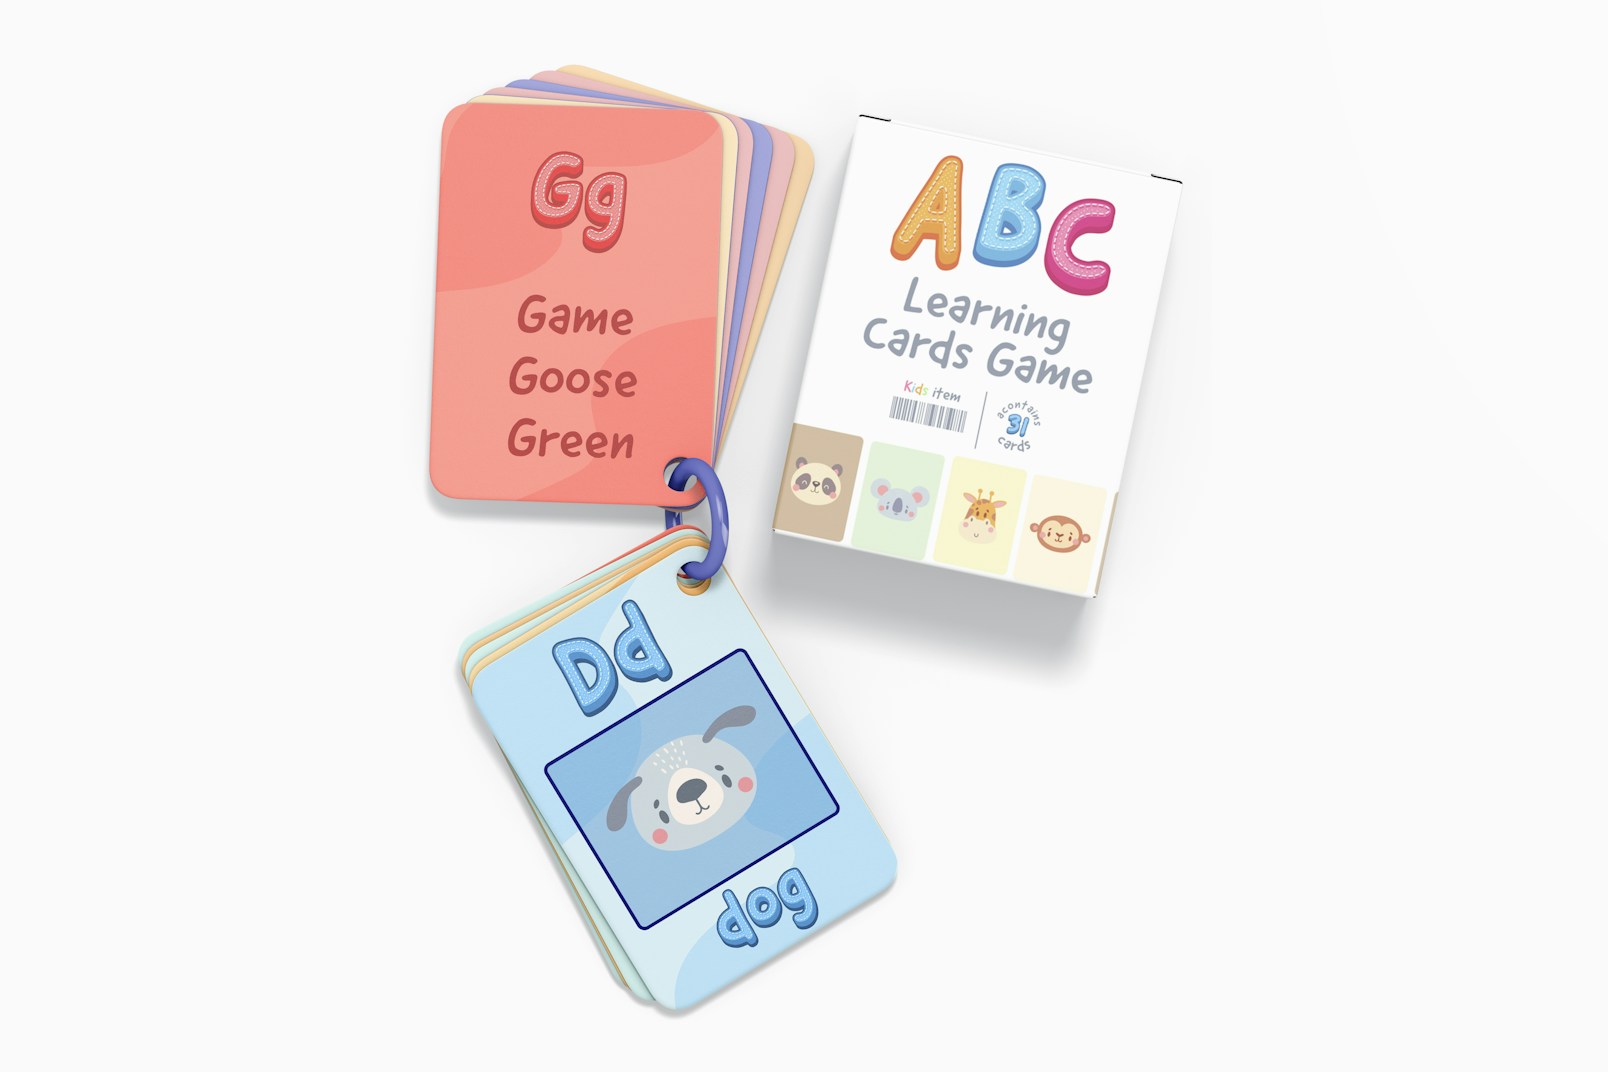 Abc Learning Cards Game Mockup 02